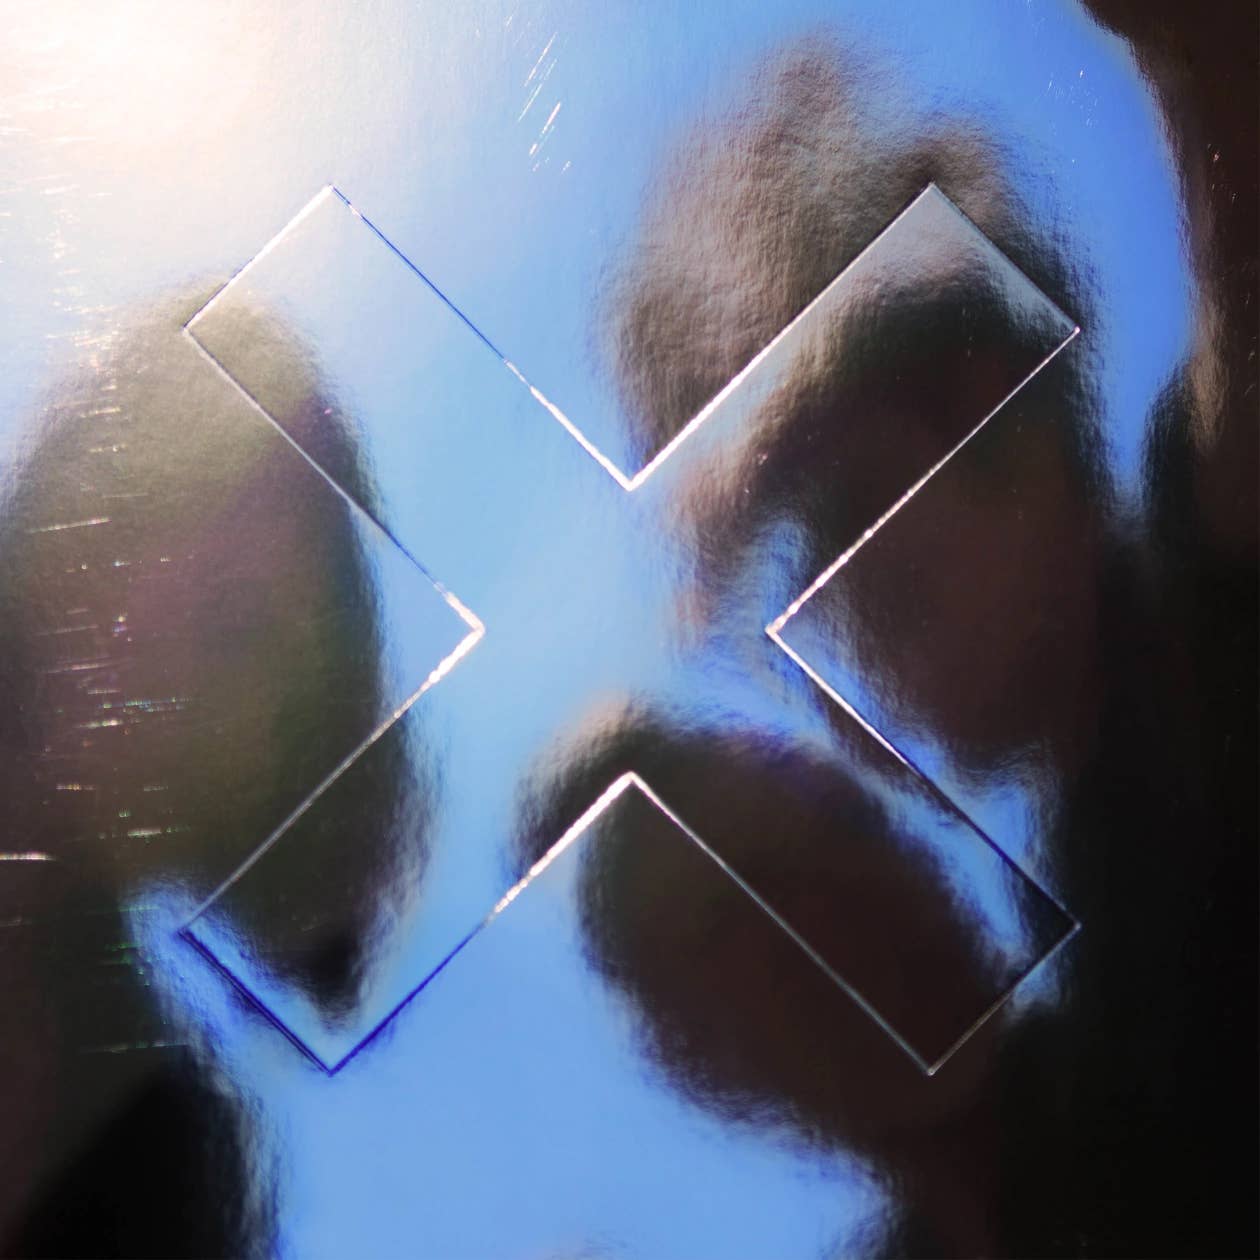 The xx's 'I See You' cover art.